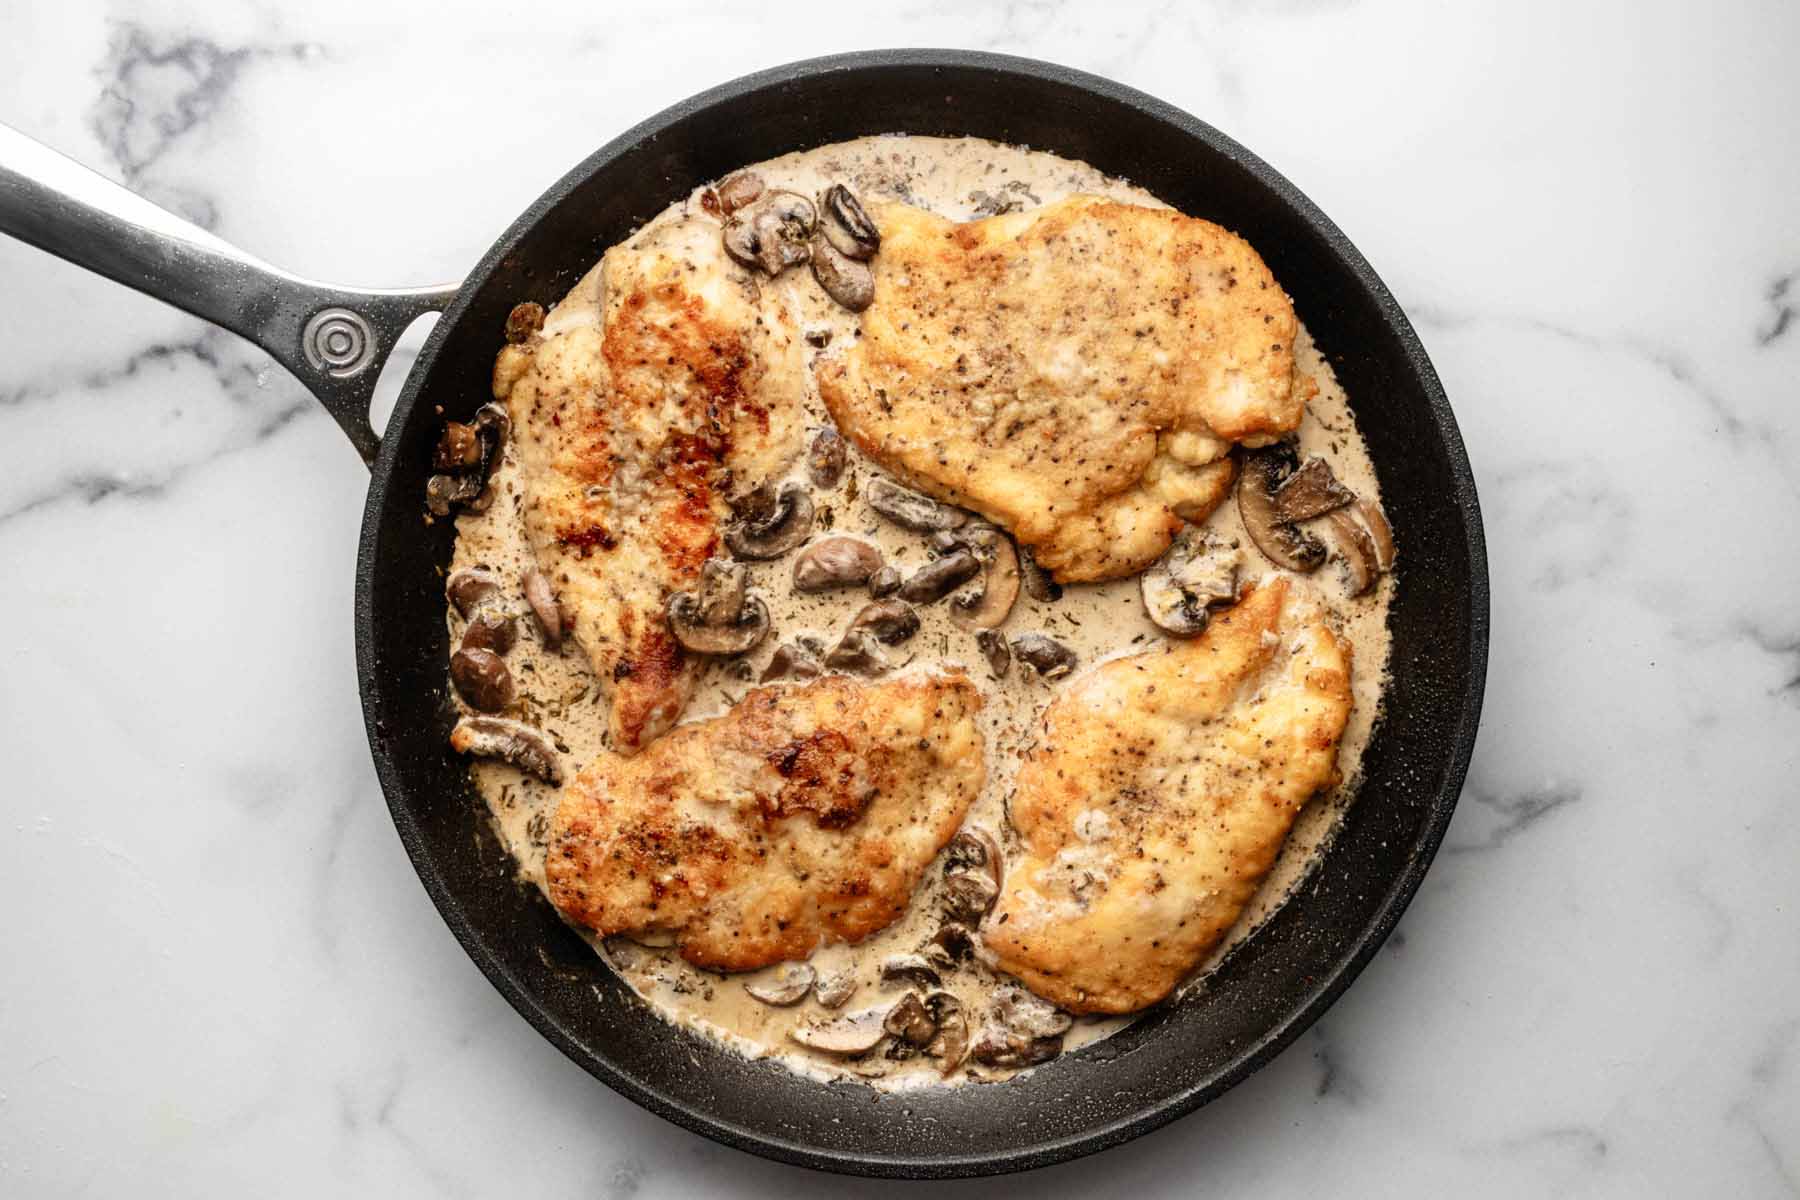 Four chicken cutlets in the skillet with mushroom sauce.